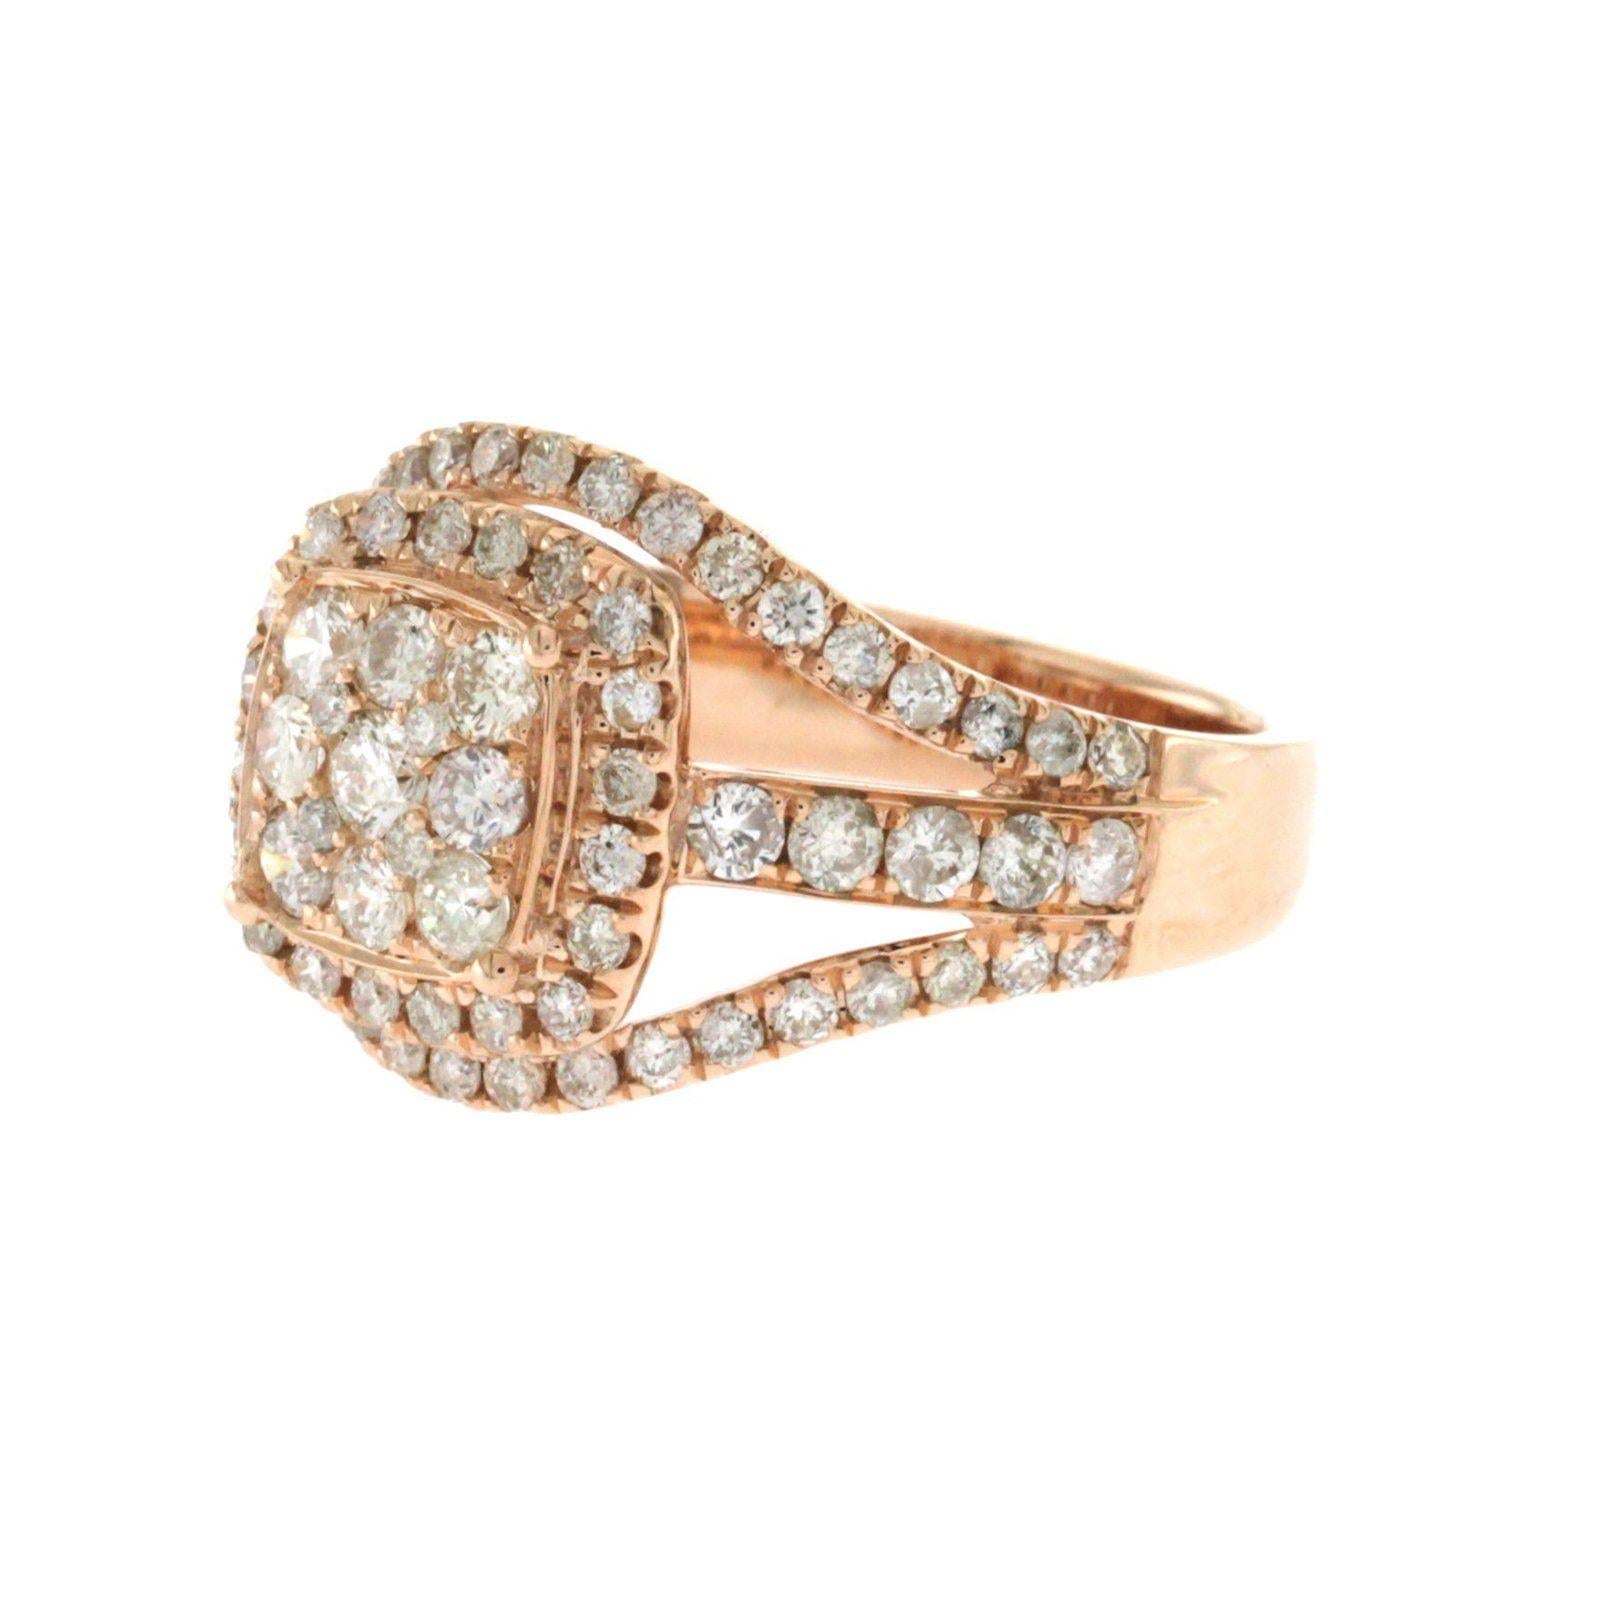 Top: 13.5 mm
Band Width: 4 mm
Metal: 14K Rose Gold 
Size: 6-9 ( Please message Us for your Size )
Hallmarks: 14K
Total Weight: 5.6 Grams
Stone Type: 1.35 CT G SI1 Diamonds
Condition: New
Estimated Retail Price: $2900
Stock Number: RAF8